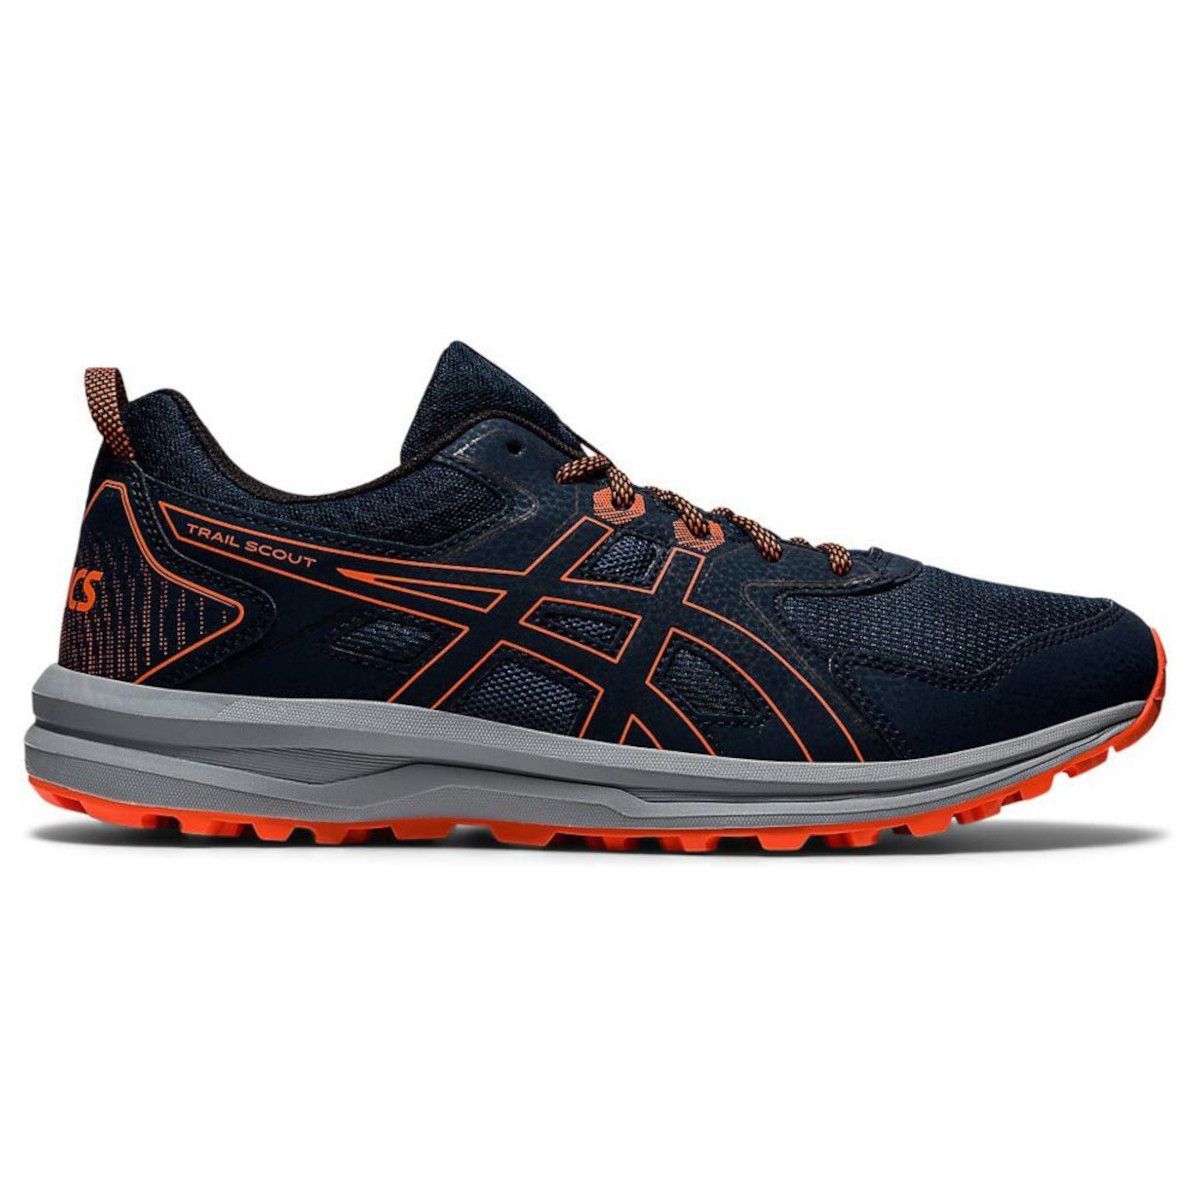 Asics Scout Men's Trail Running Shoes 1011A663-400